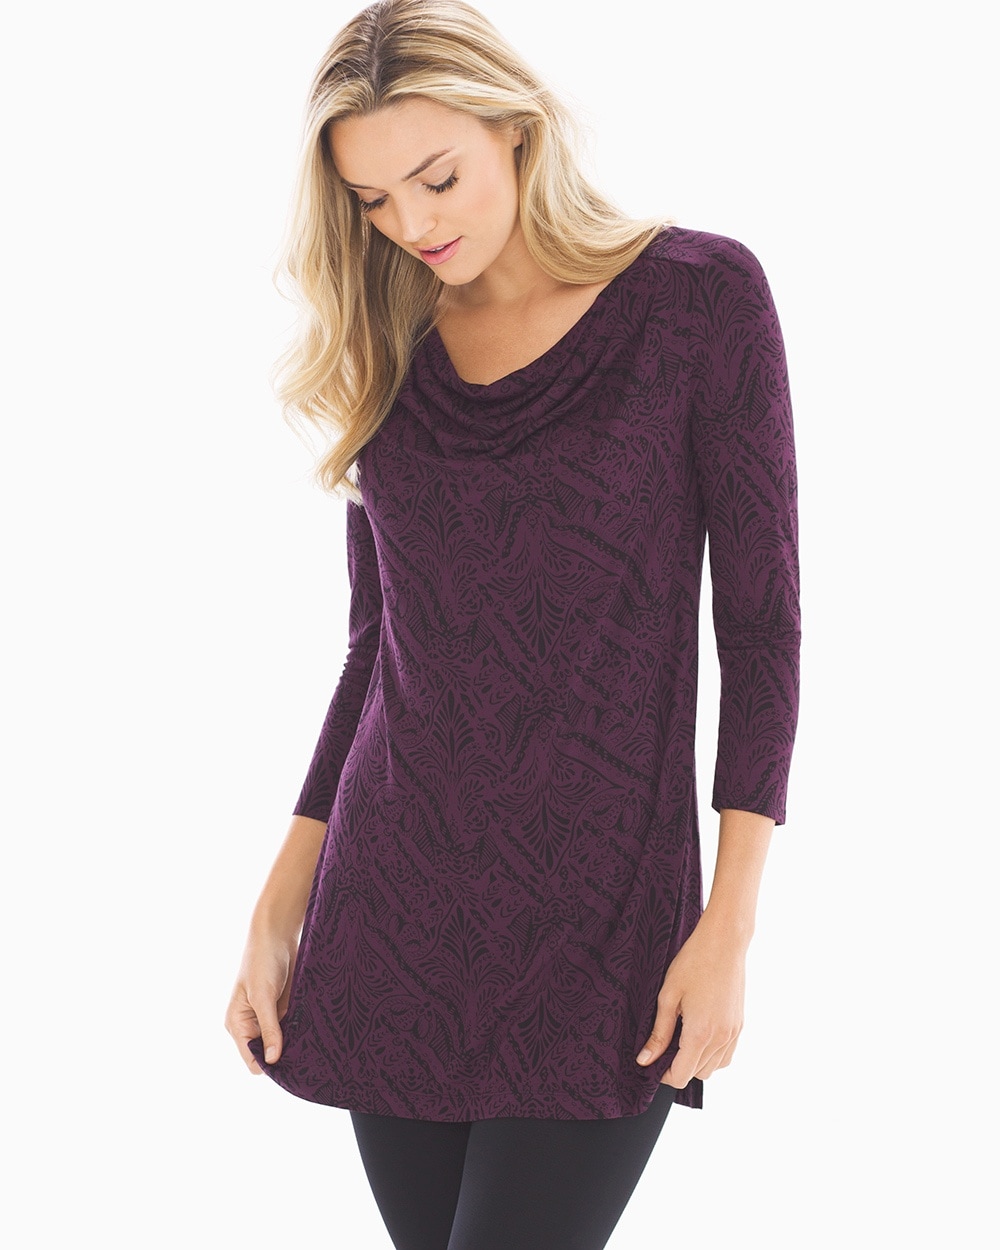 Soft Jersey Cowl Neck Tunic Decandence Bordeaux